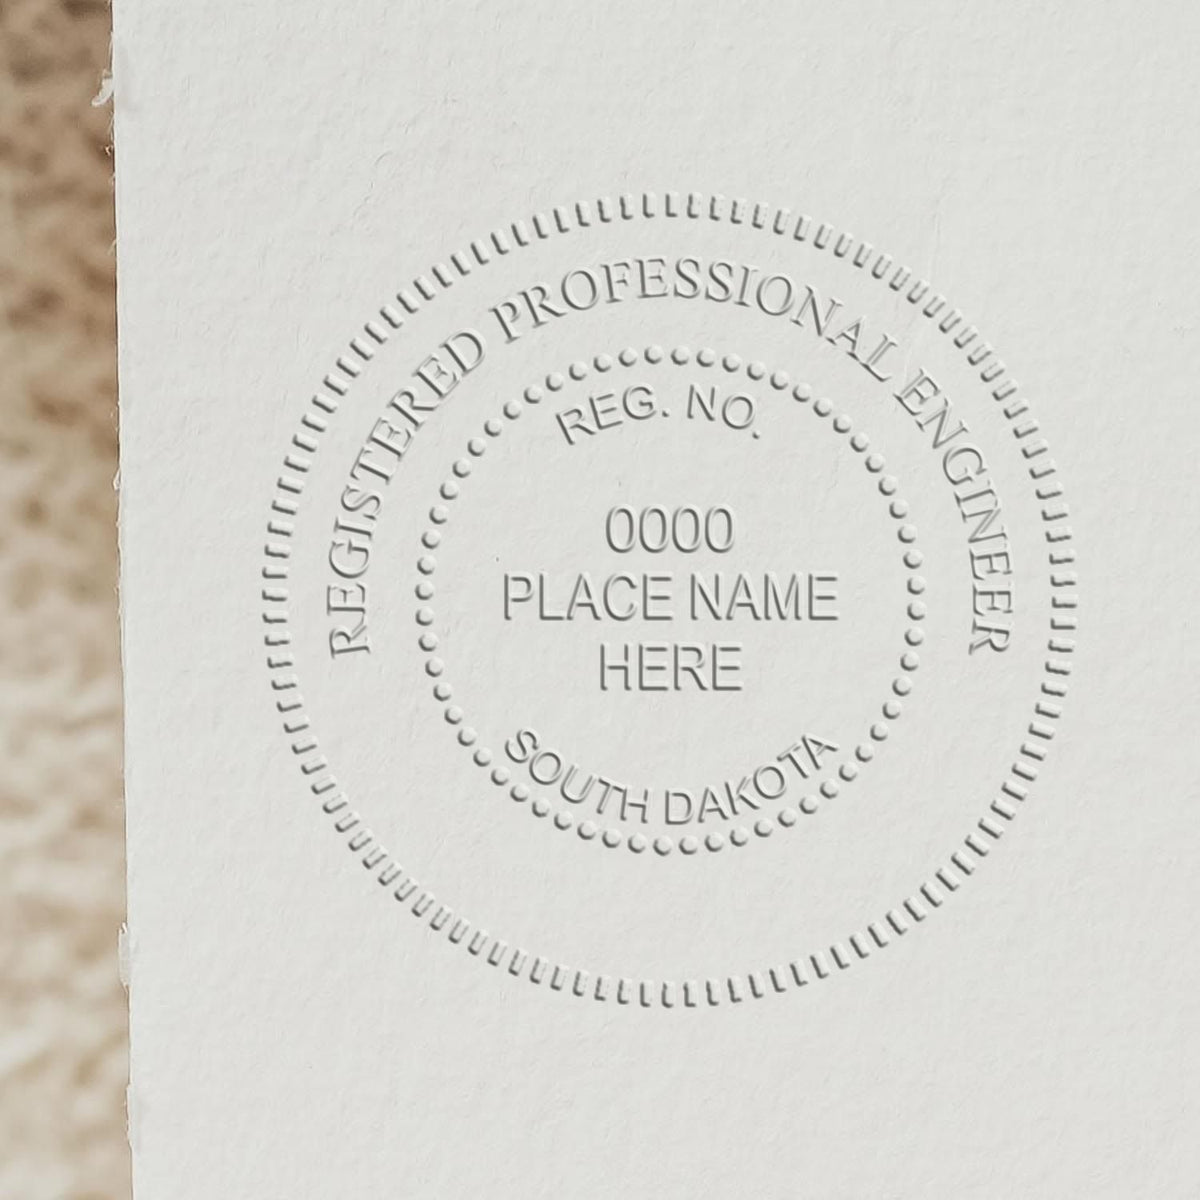 A stamped imprint of the Gift South Dakota Engineer Seal in this stylish lifestyle photo, setting the tone for a unique and personalized product.